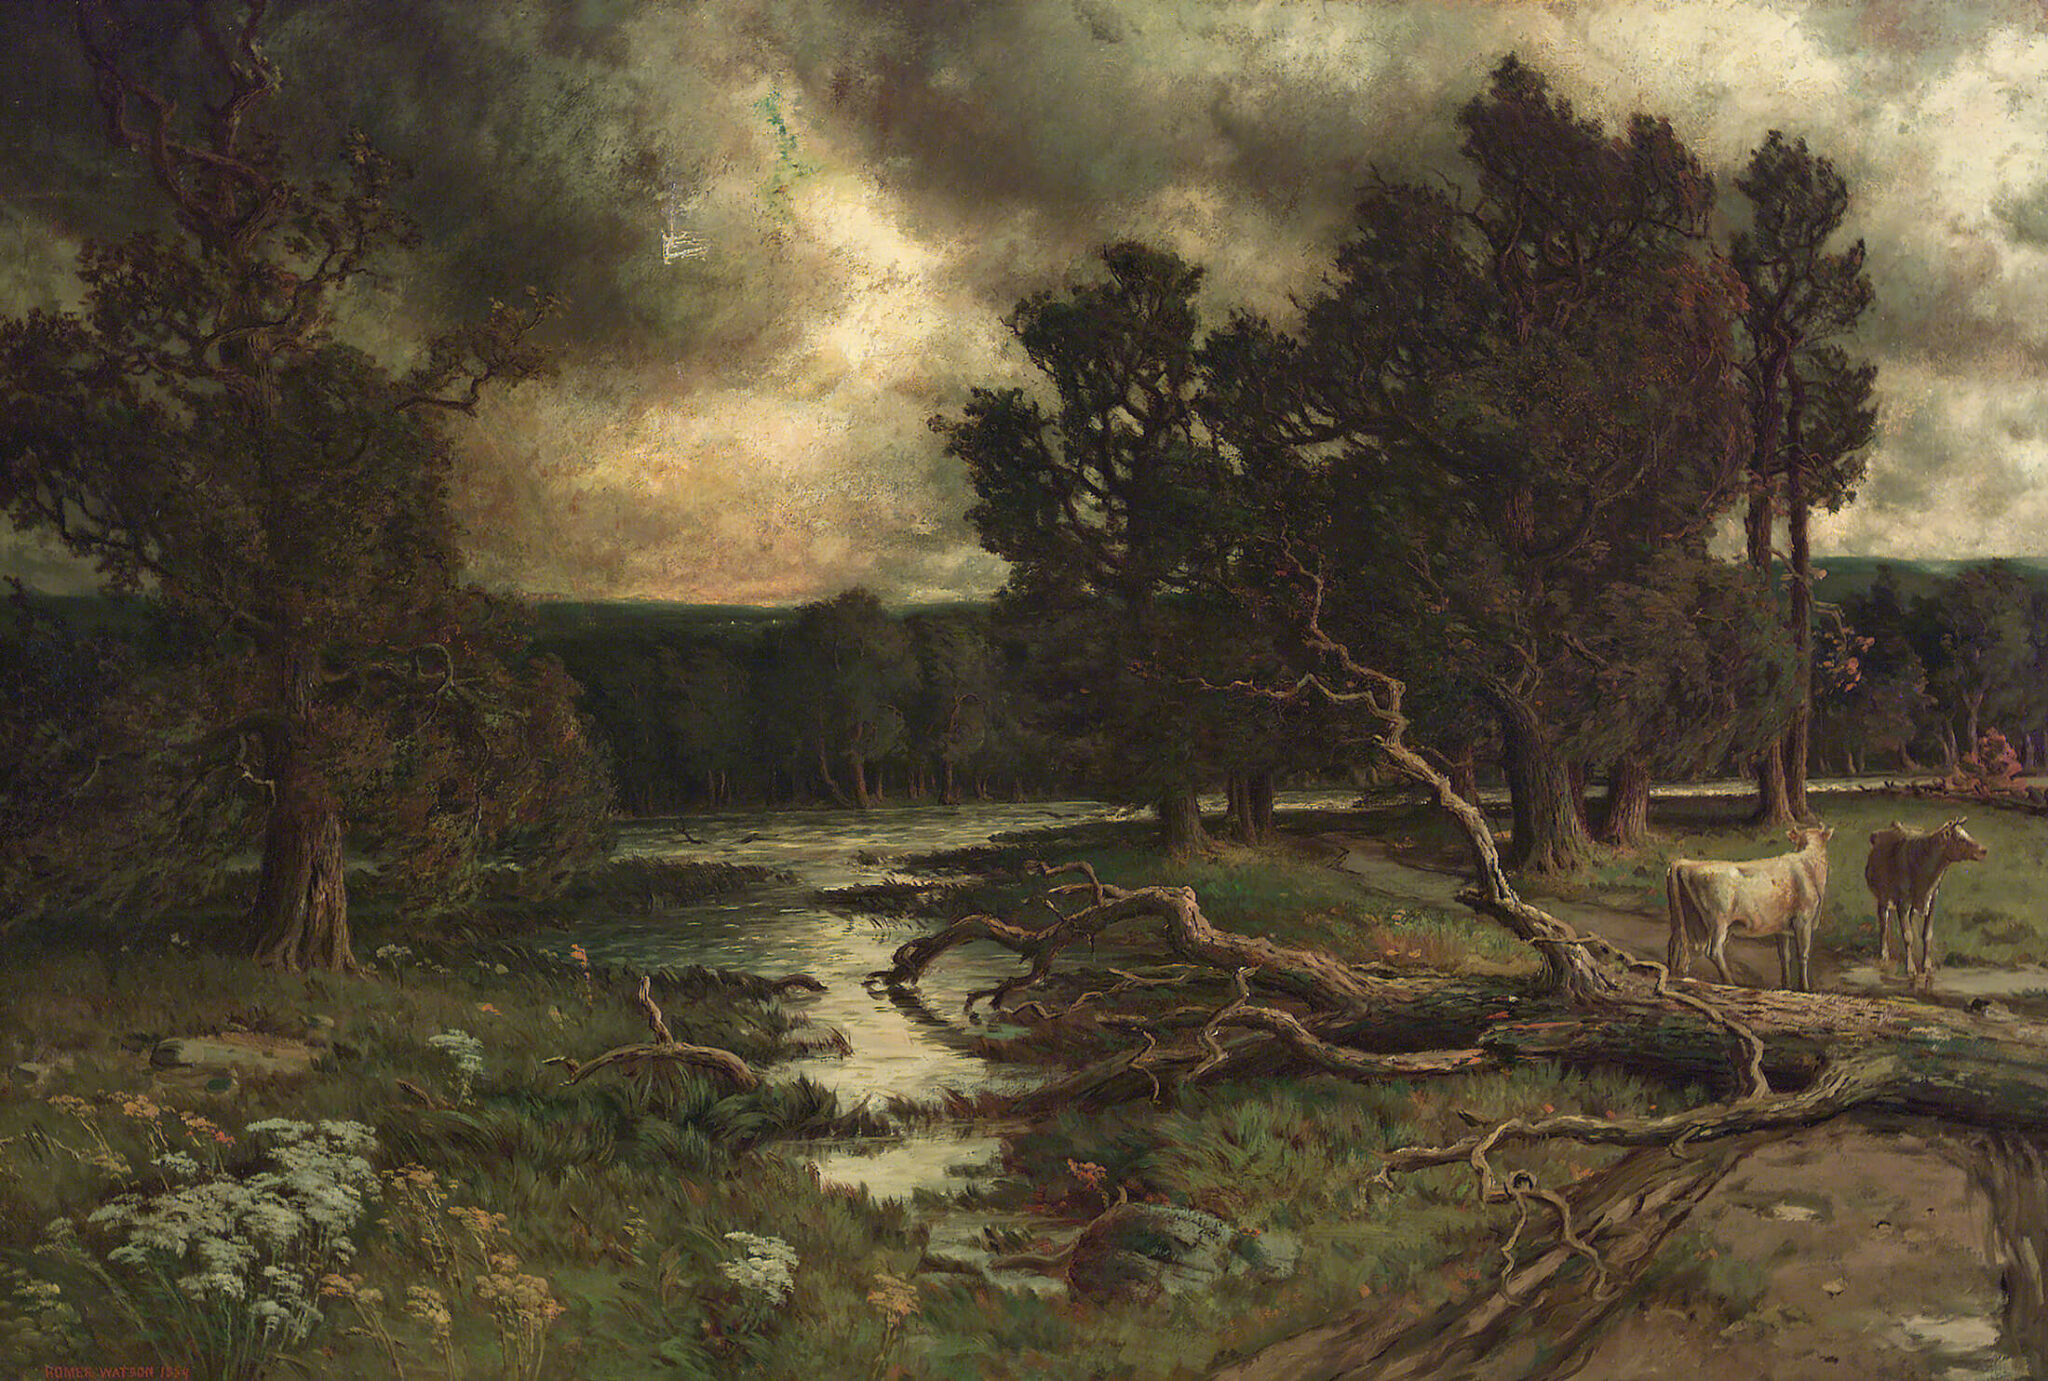 Homer Watson, Near the Close of a Stormy Day, 1884